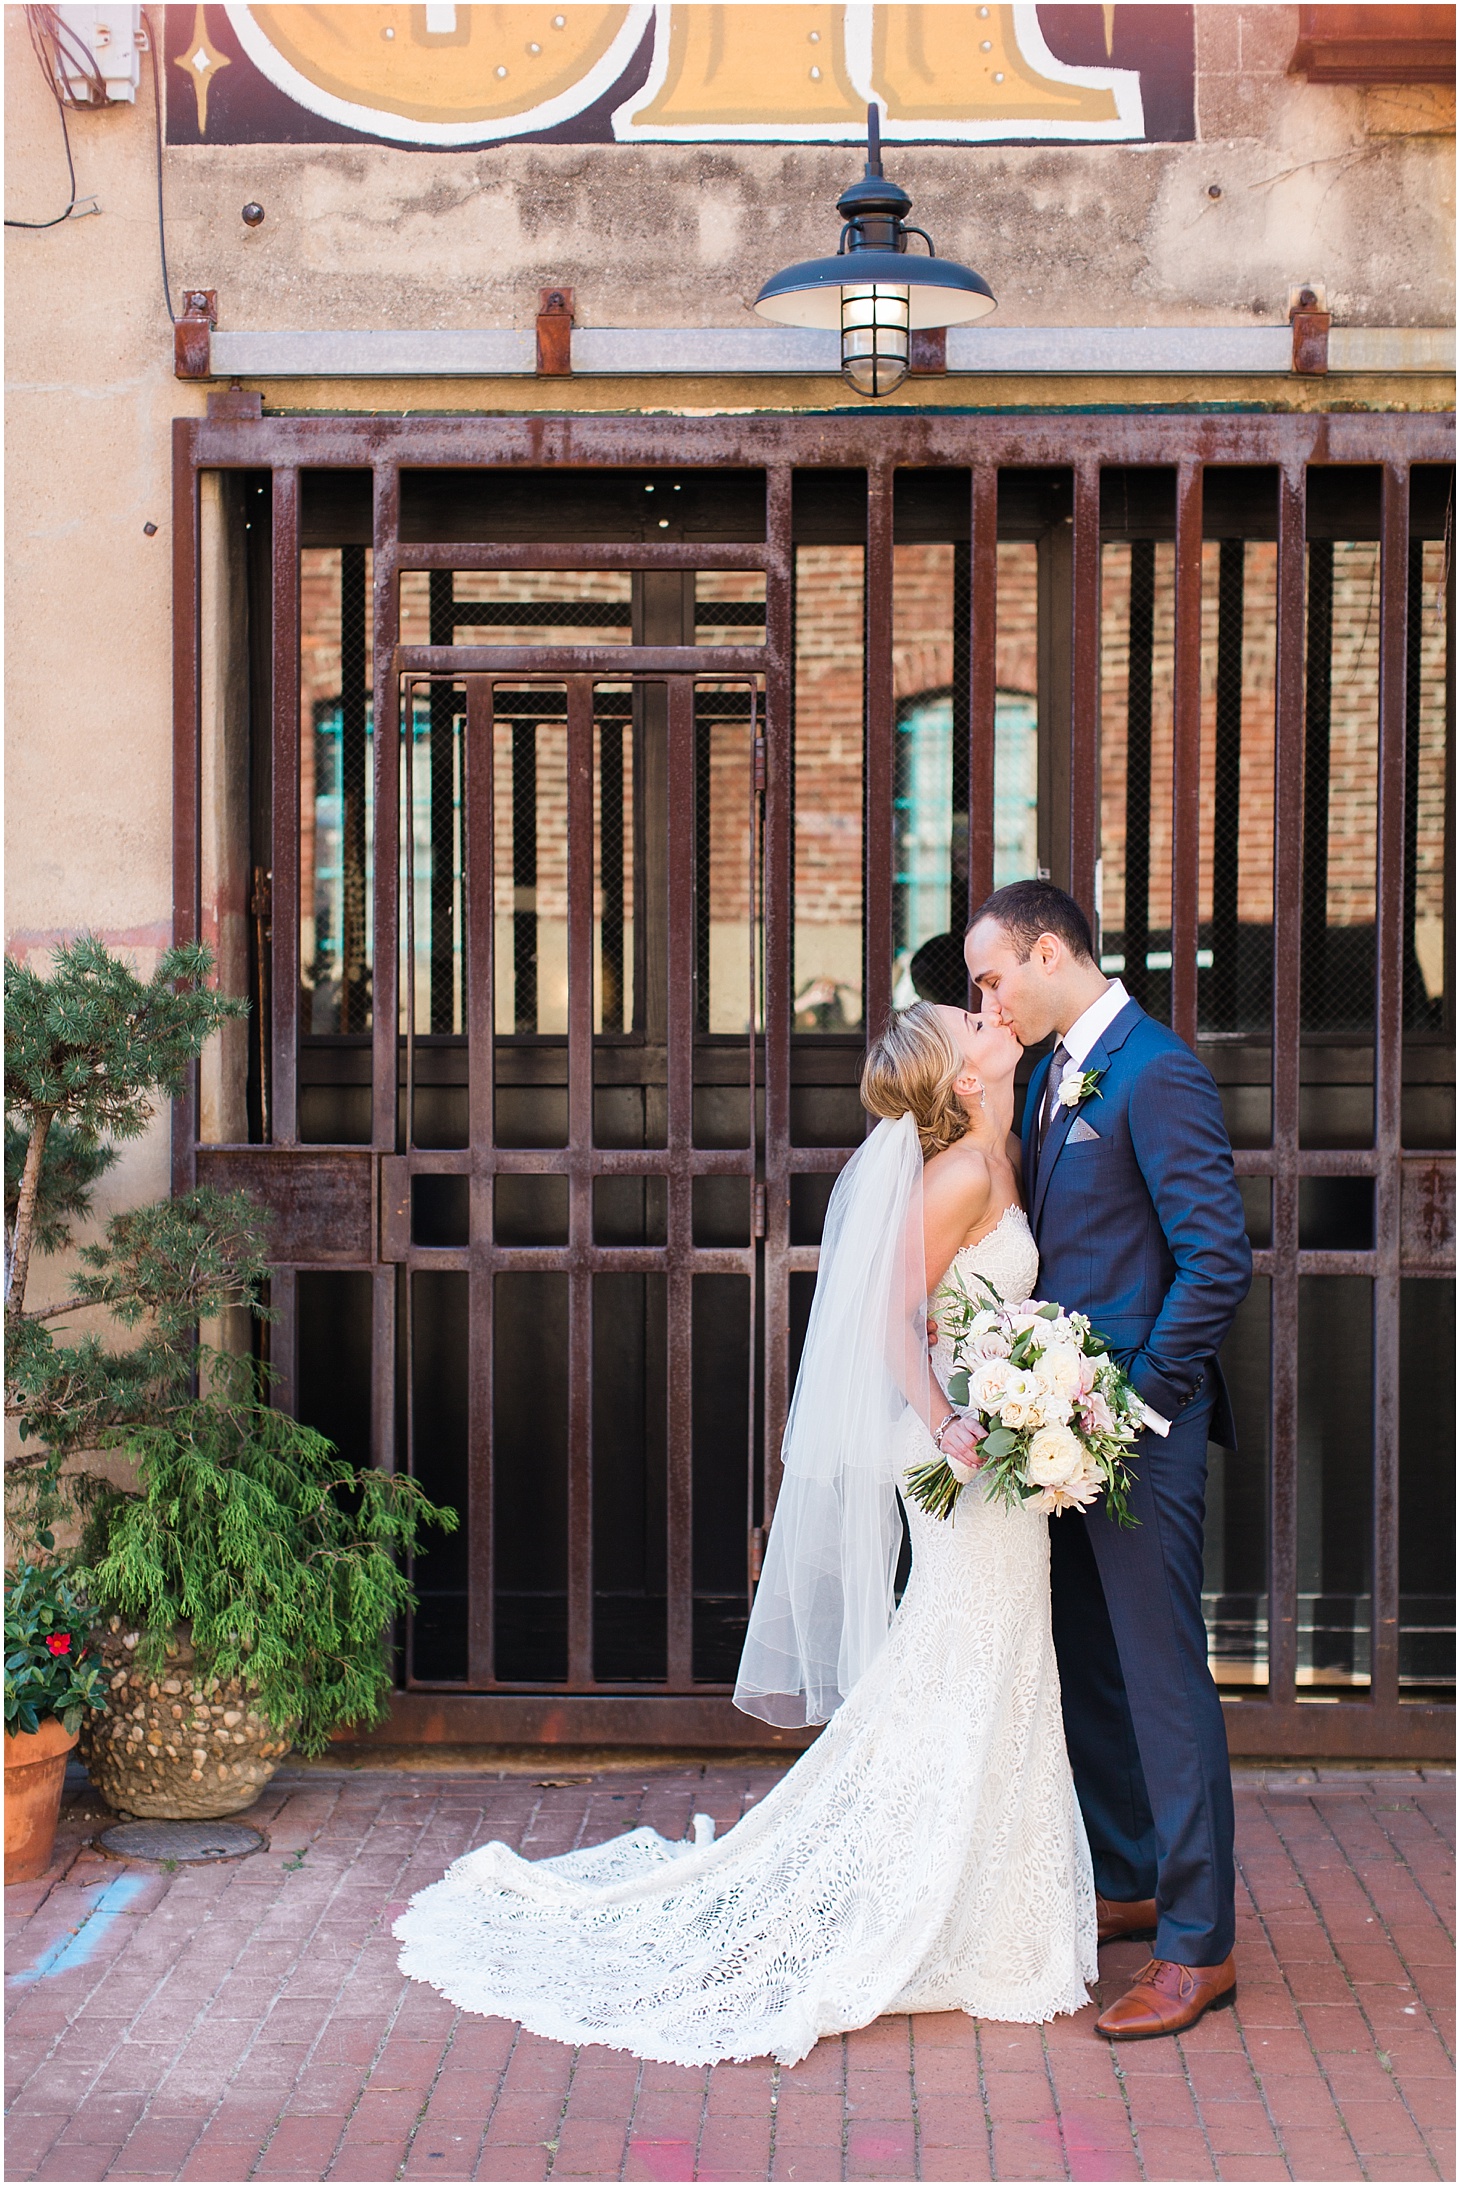 Wedding Portraits at Long View Gallery, Industrial-Chic Wedding in DC, Sarah Bradshaw Photography, DC Wedding Photographer